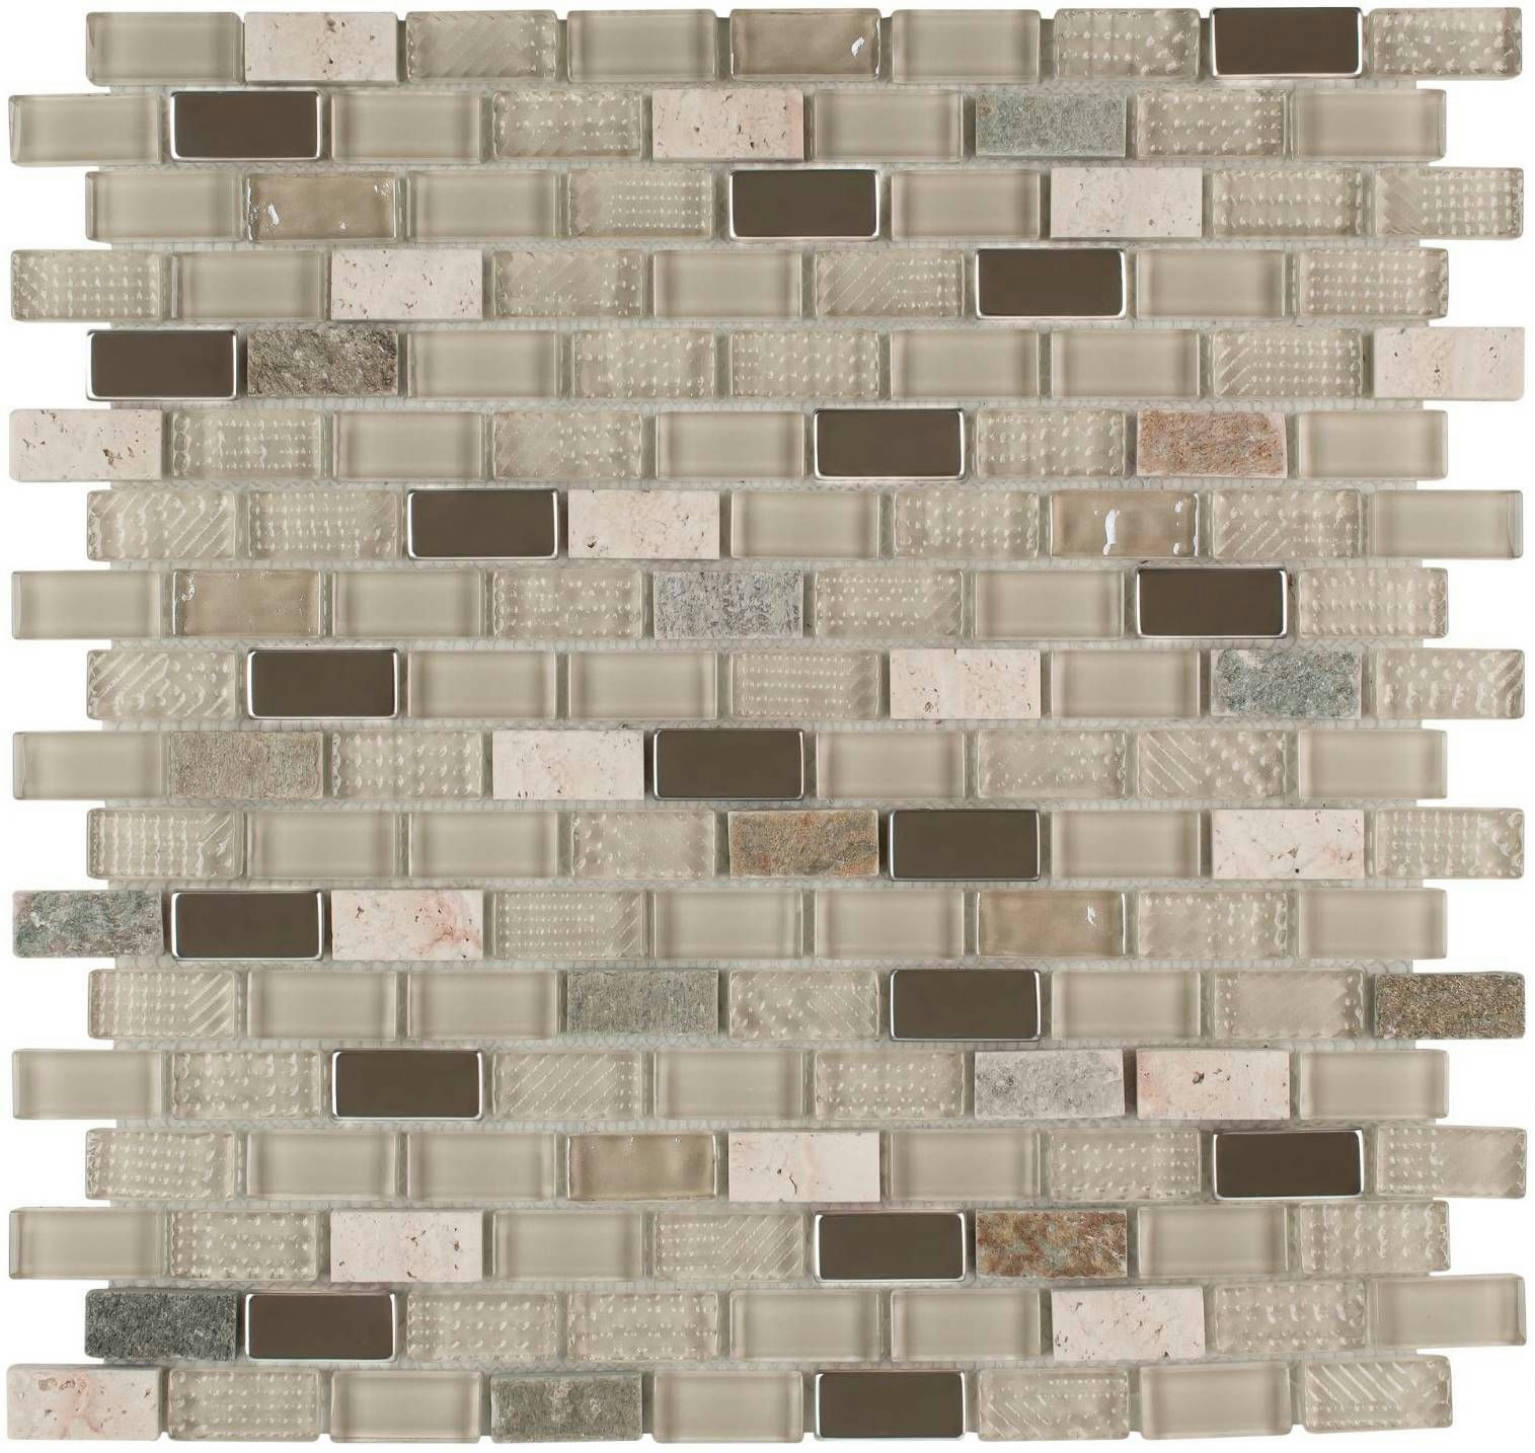 CL502 | Stones & More | Finest selection of Mosaics, Glass, Tile and Stone